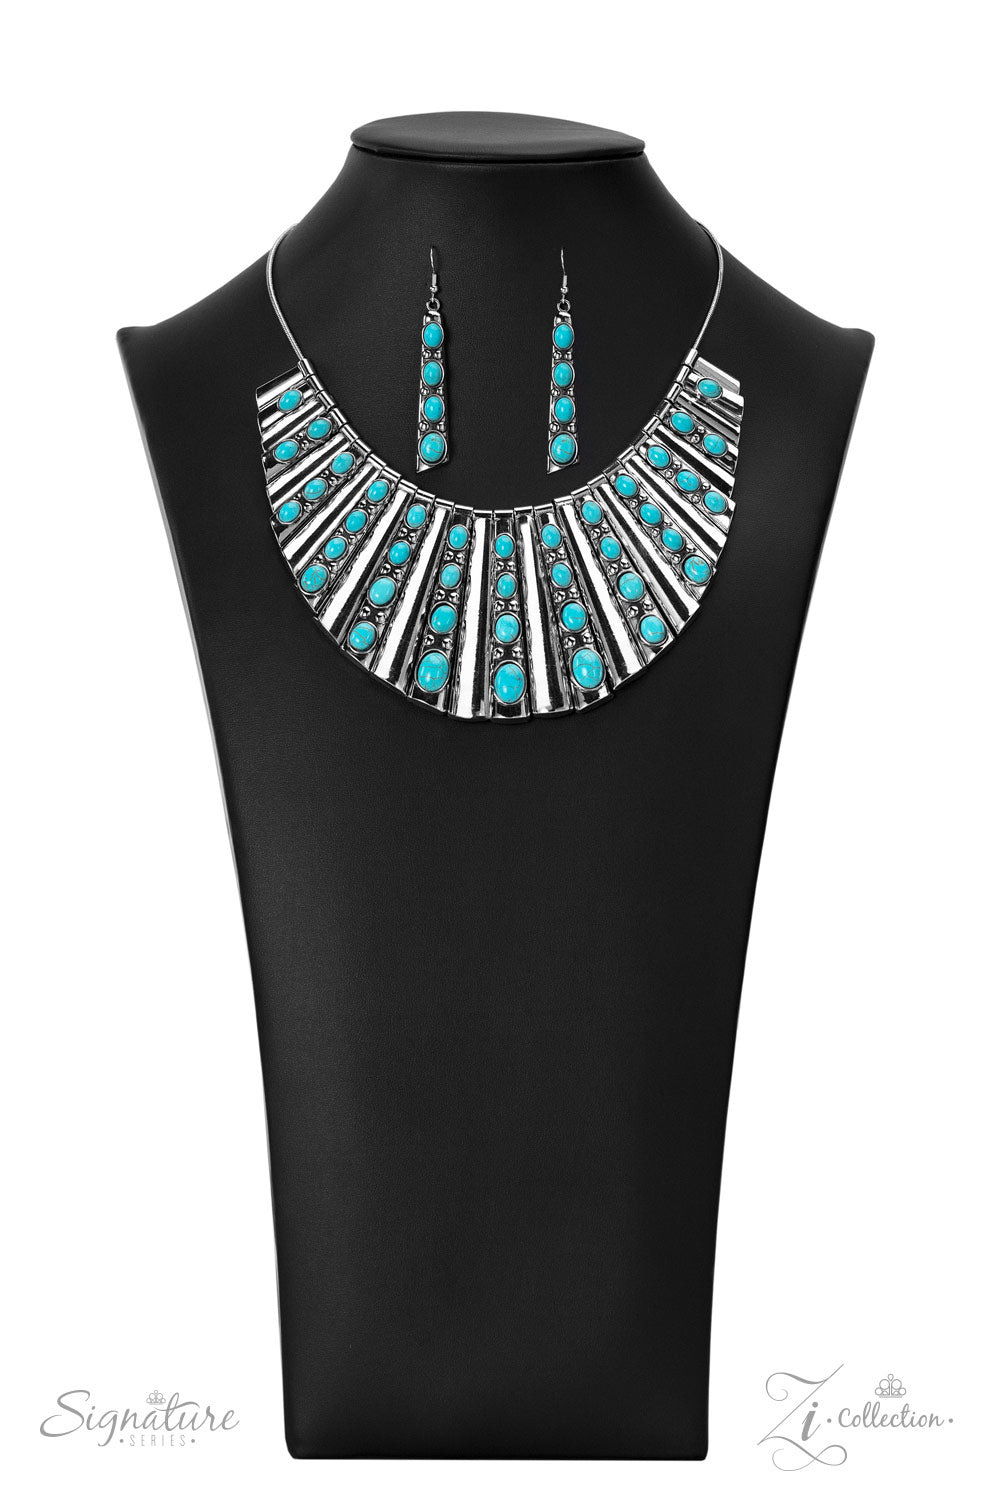 The Ebony Blue ZiCollection Necklace